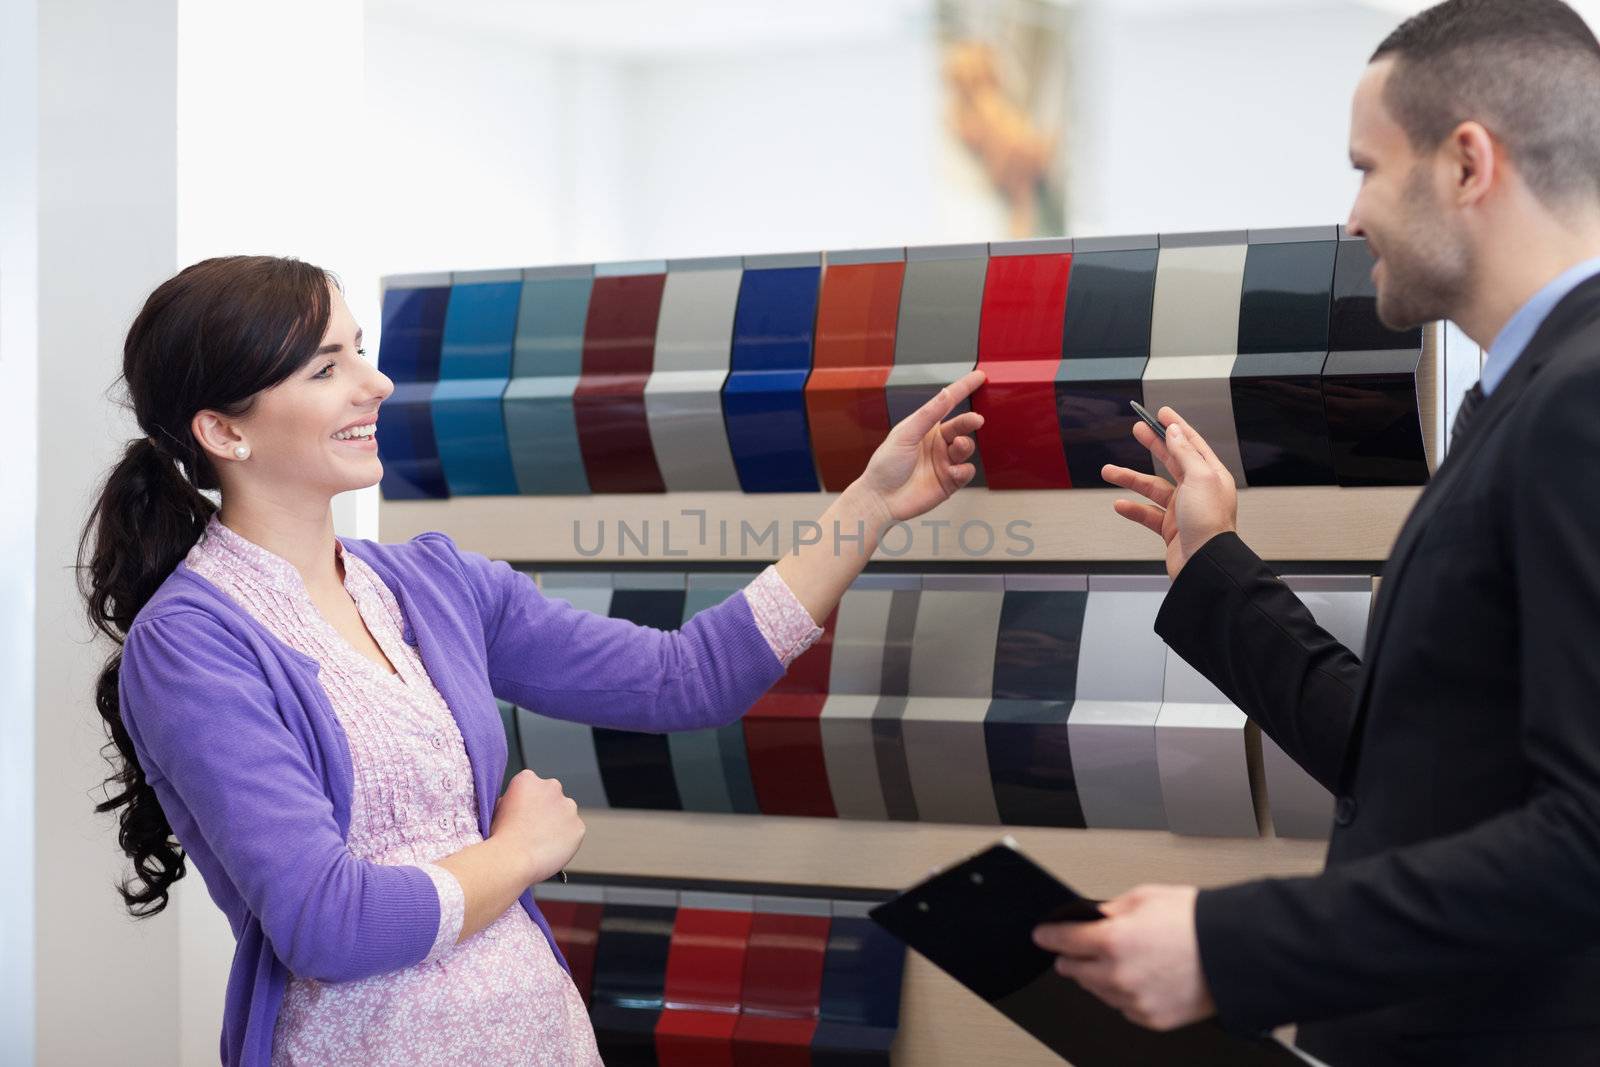 Man and woman choosing color in a color palette while smiling